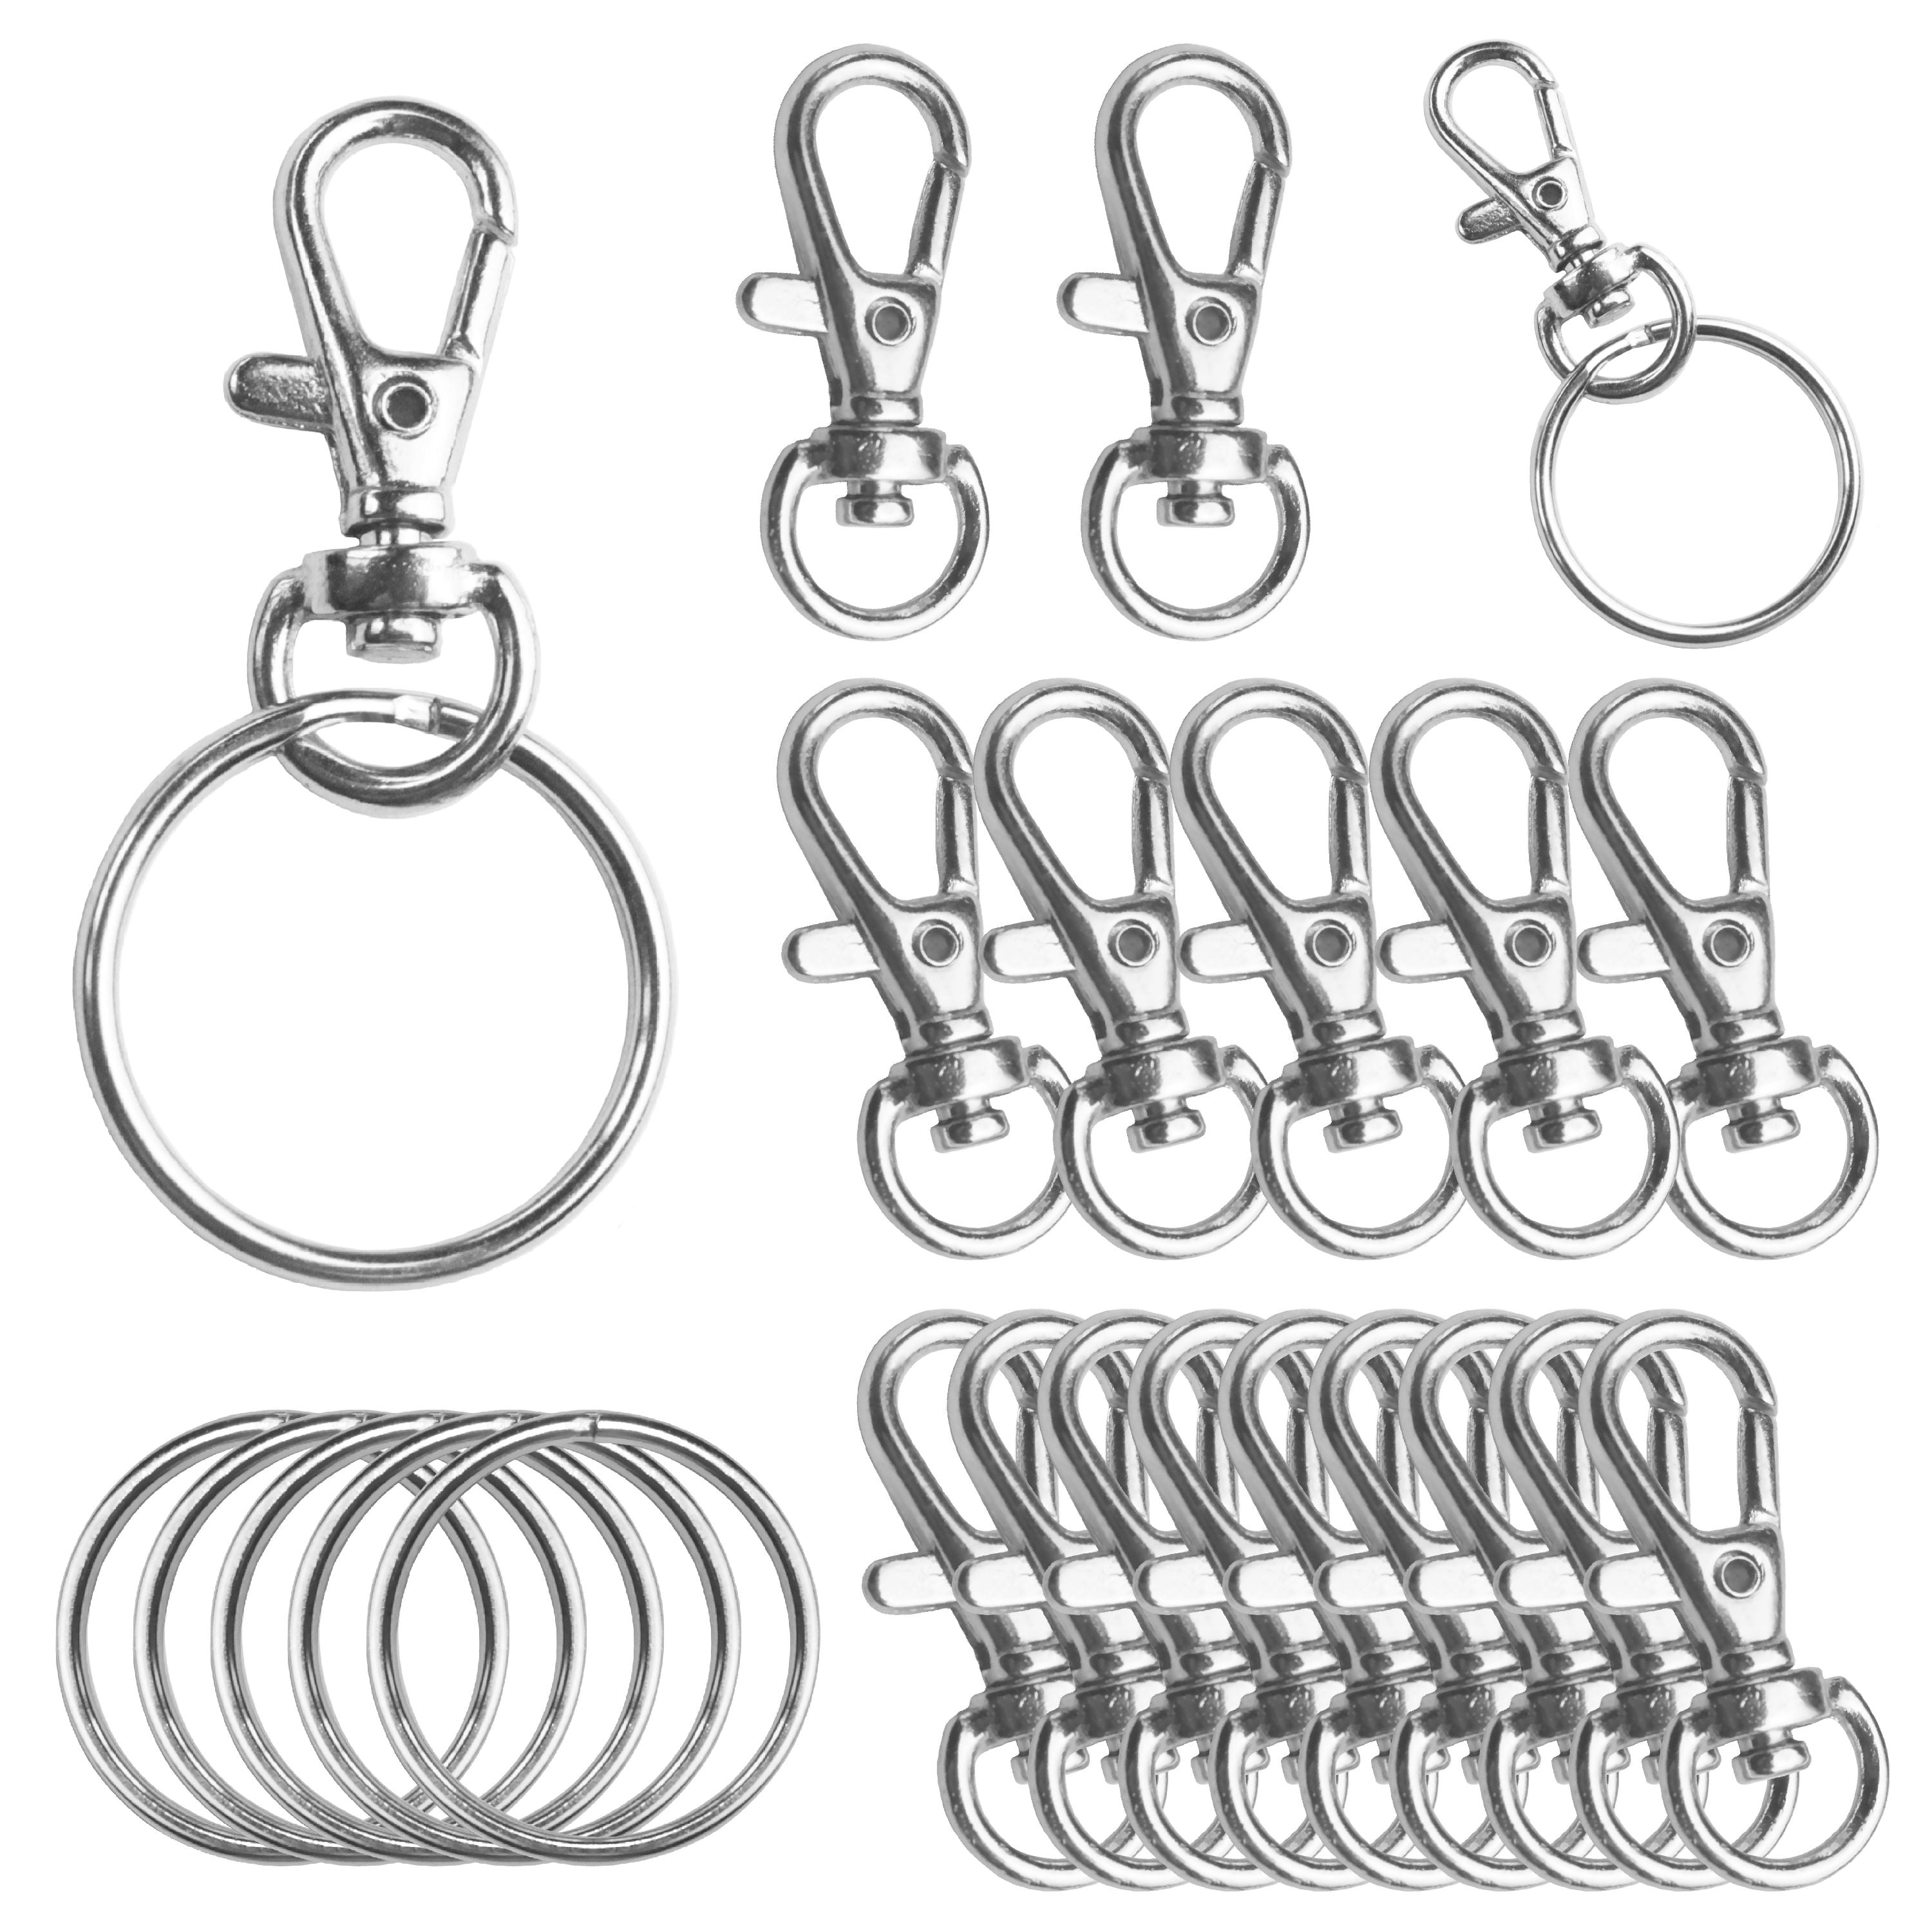 8 Pieces Metal Keychain Swivel Clasps with 8 Pieces Key Rings Metal Keychain Key Spring Clip Hook Lanyard Snap Hooks Keyring Holder Organizer Swivel Clasps for DIY Crafts Car Key Supplies 